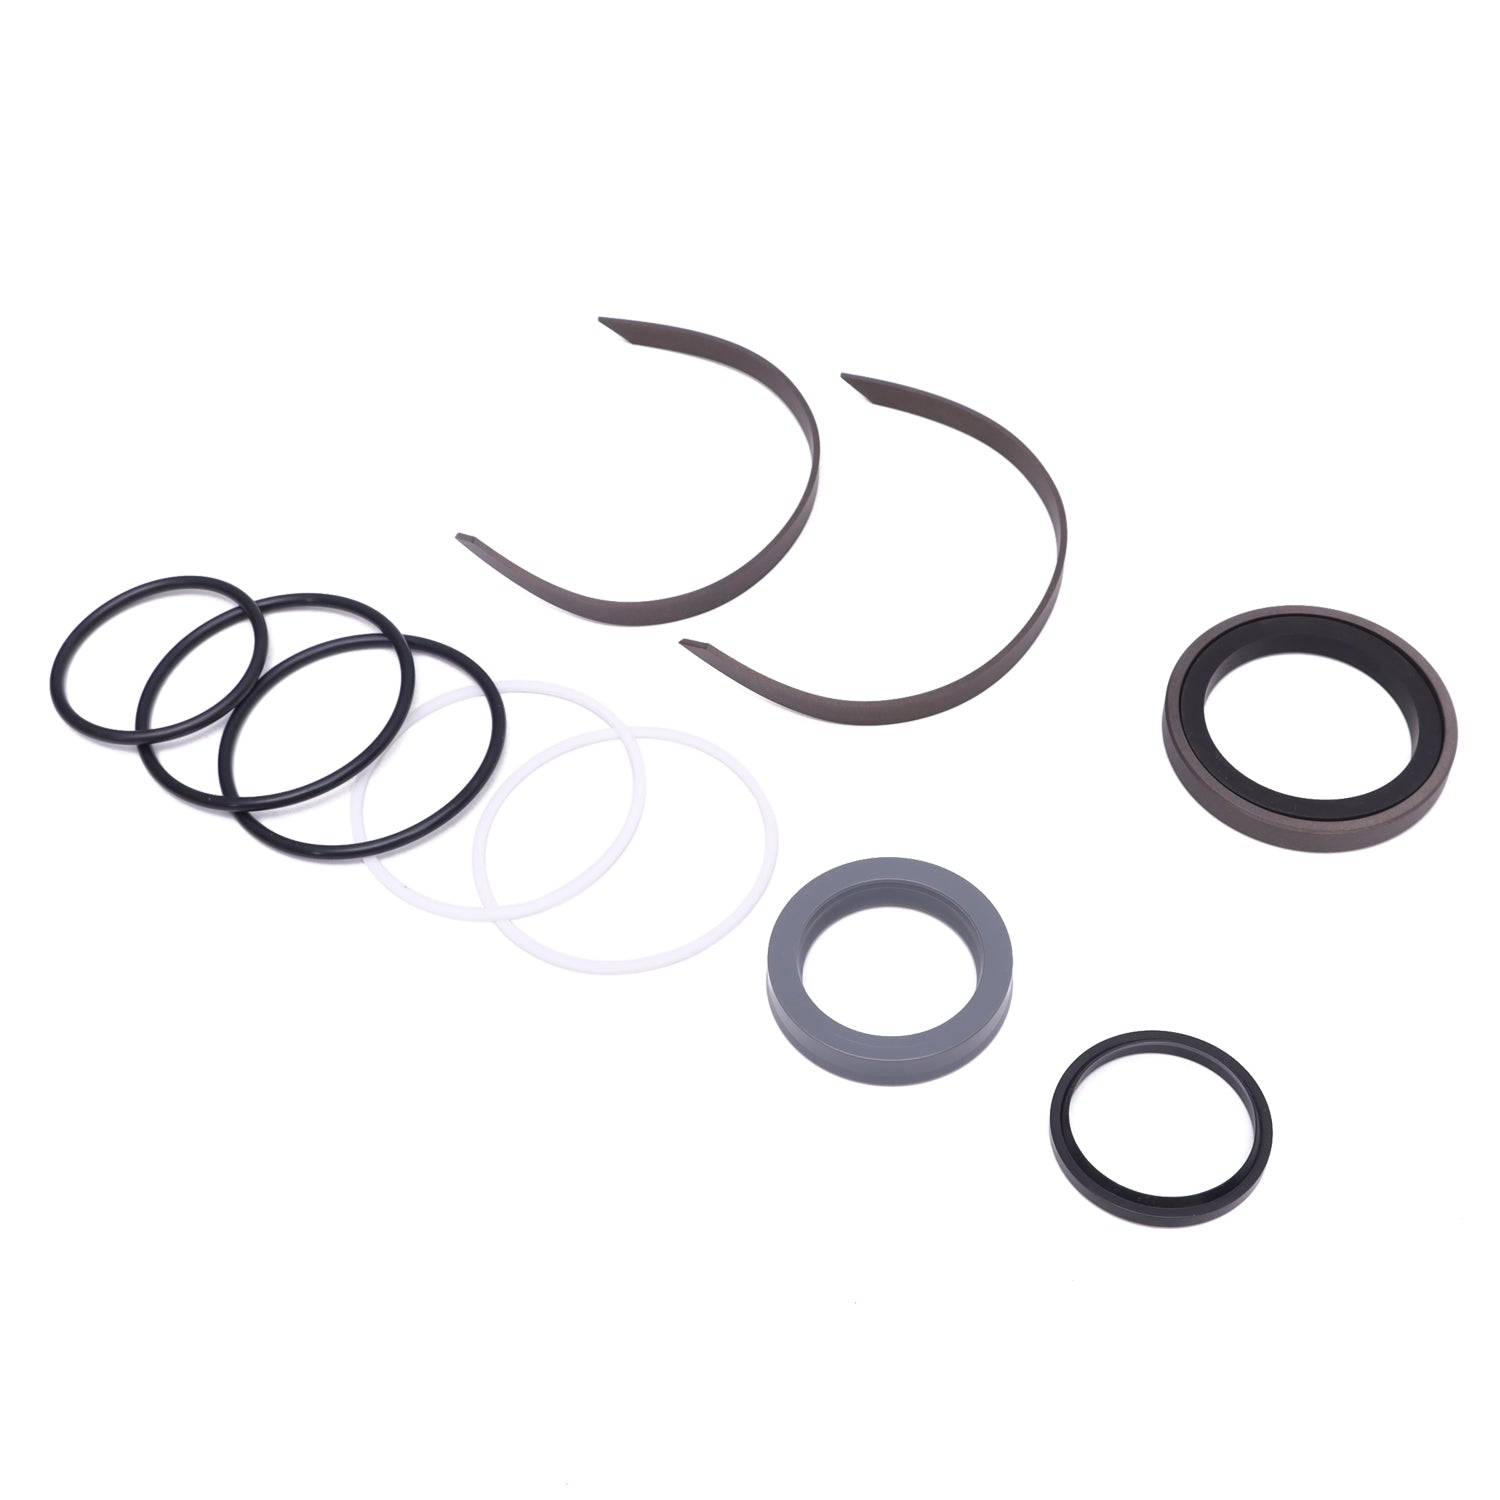 10064756 Seal Kit for Schwing Trunk-Mounted Concrete Pump Slewing Cylinder, Hydraulic Plunger Cylinder Sealing Kit for Schwing Stetter Boom Concrete Pump, fits 10094569 (80/45 X 185) - KUDUPARTS